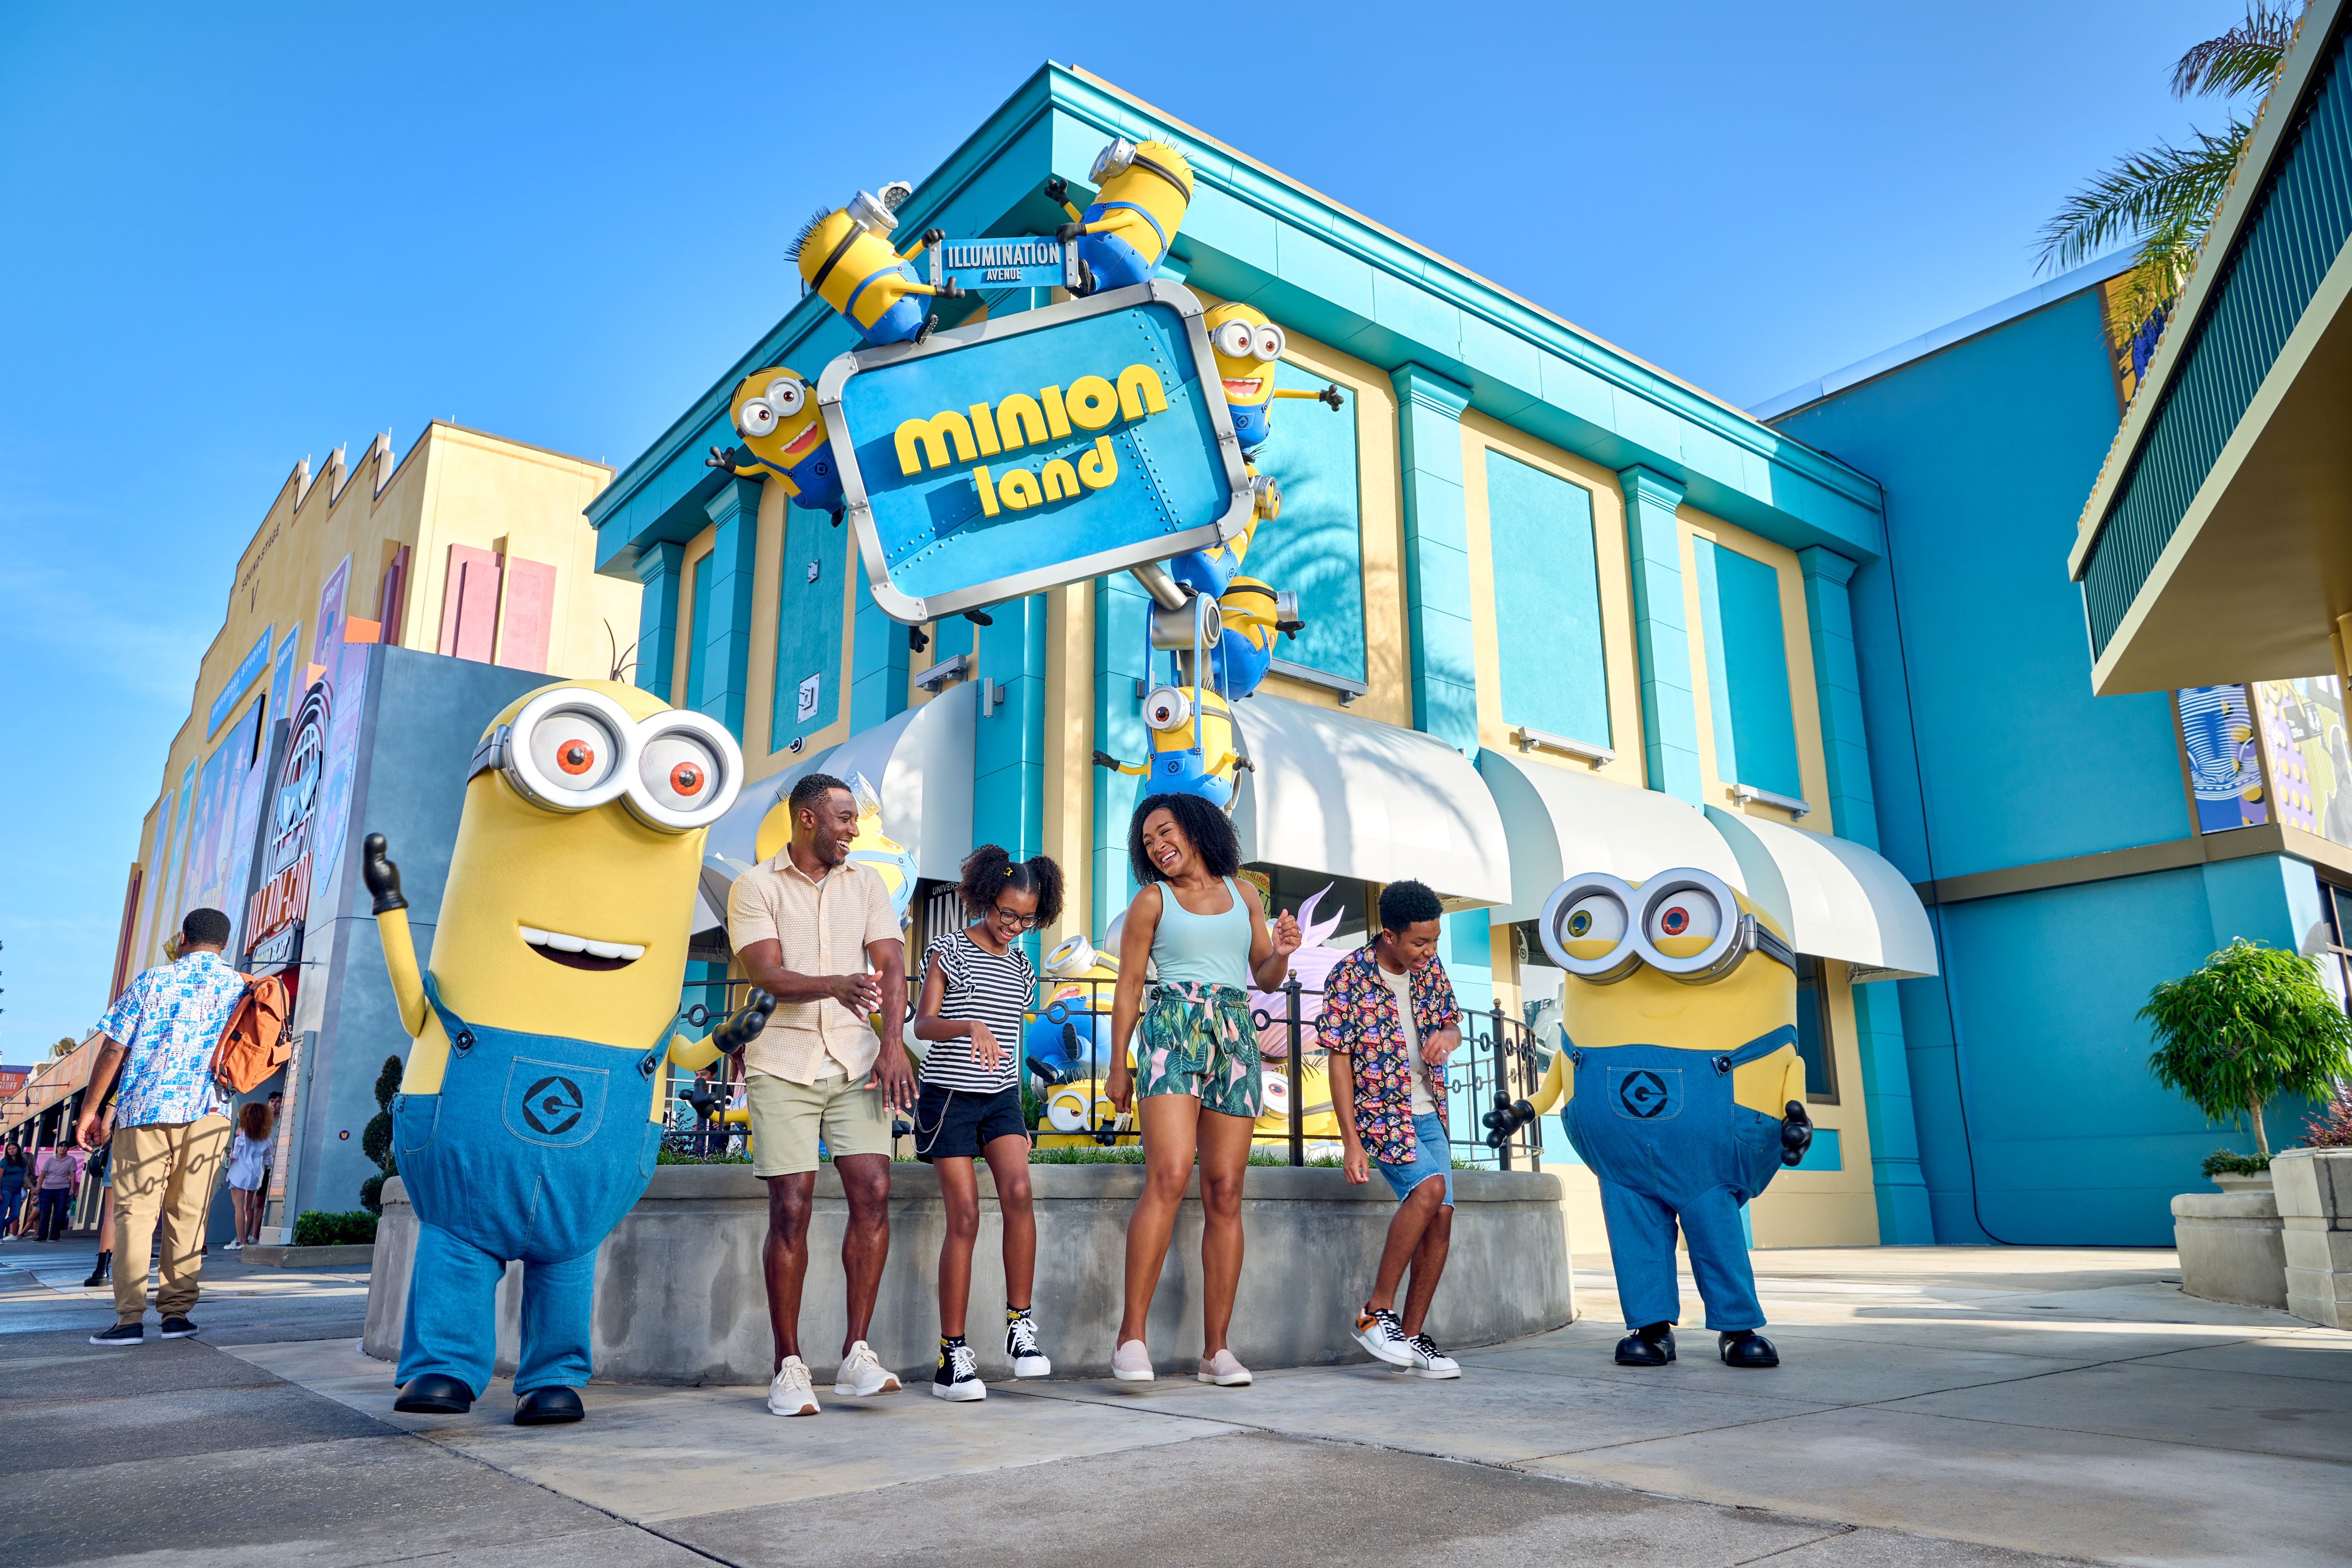 Illuminations’s Highly Anticipated Minion Land, Featuring the All-New Villain-Con Minion Blast, Minion Cafe, Bake My Day and More Is Now Open at Universal Orlando Resort